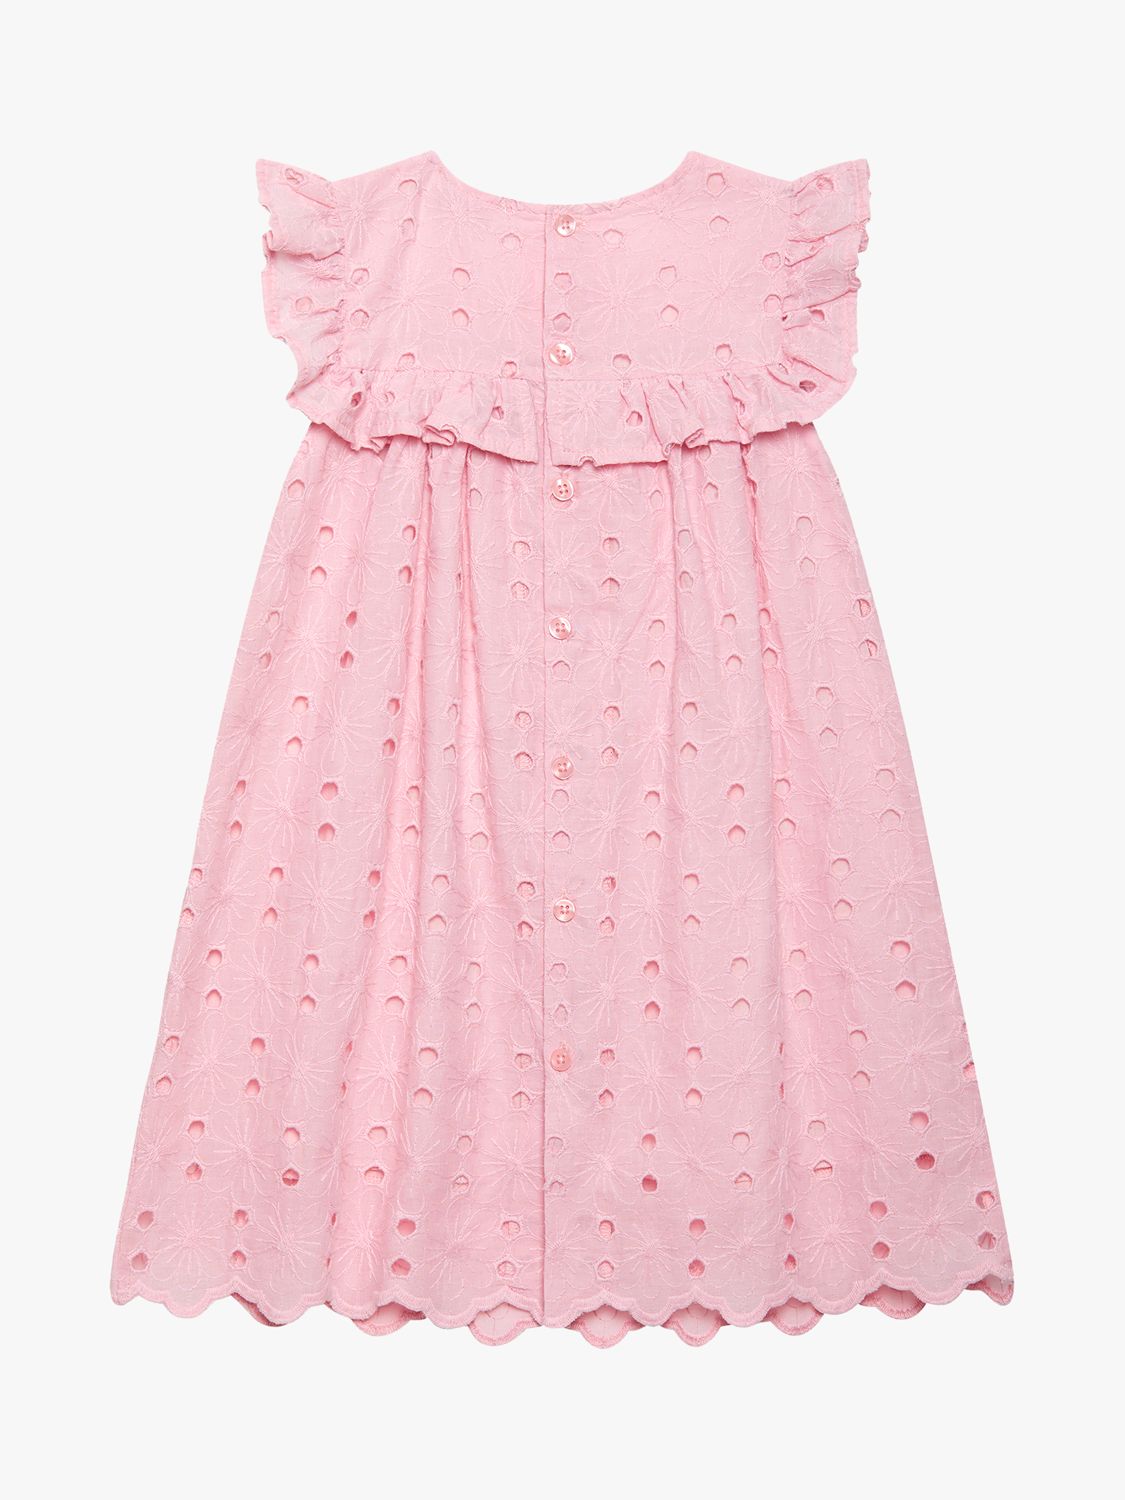 Trotters Kids' Eliza Broderie Anglaise Ruffle Dress, Pink, 10-11 years